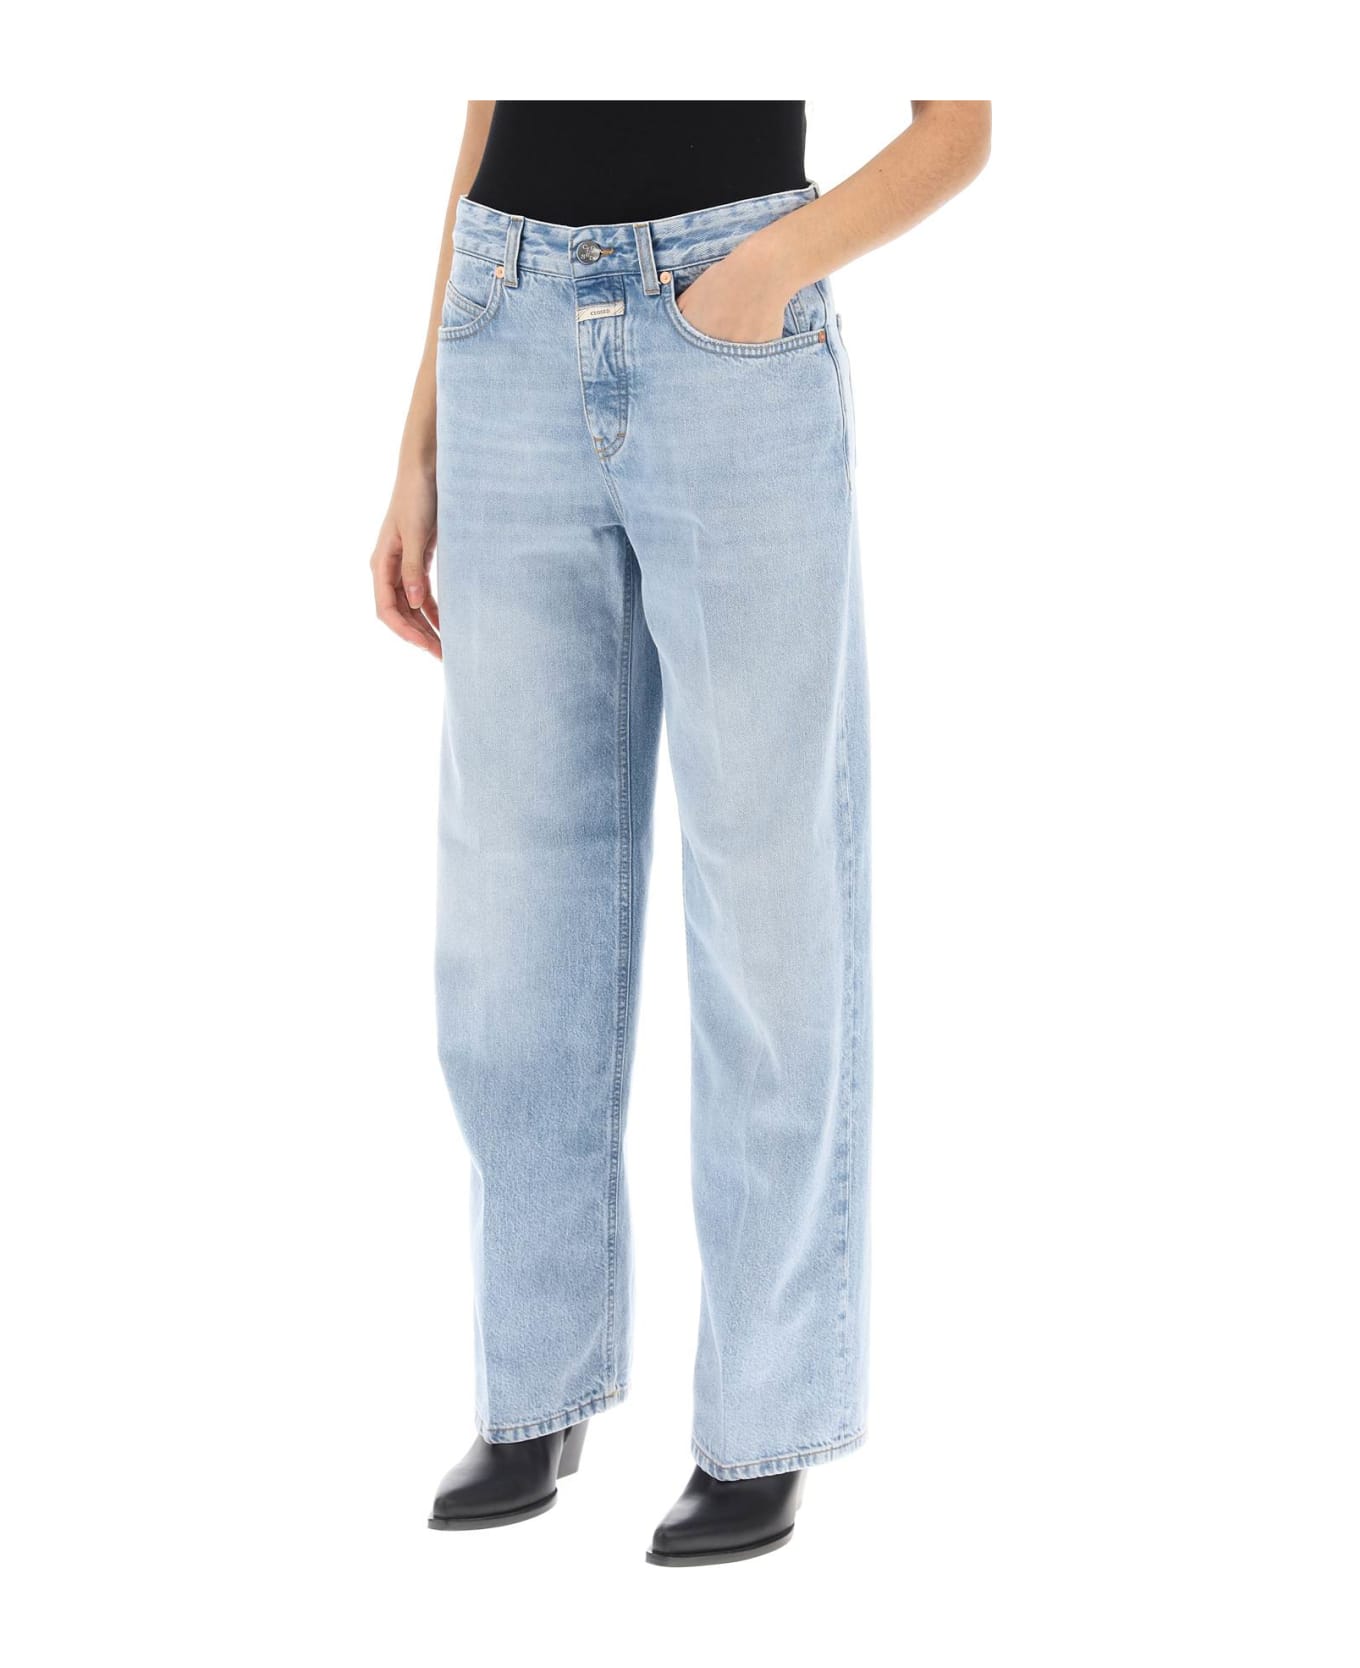 Closed Loose Jeans With Tapered Cut - LIGHT BLUE (Light blue)